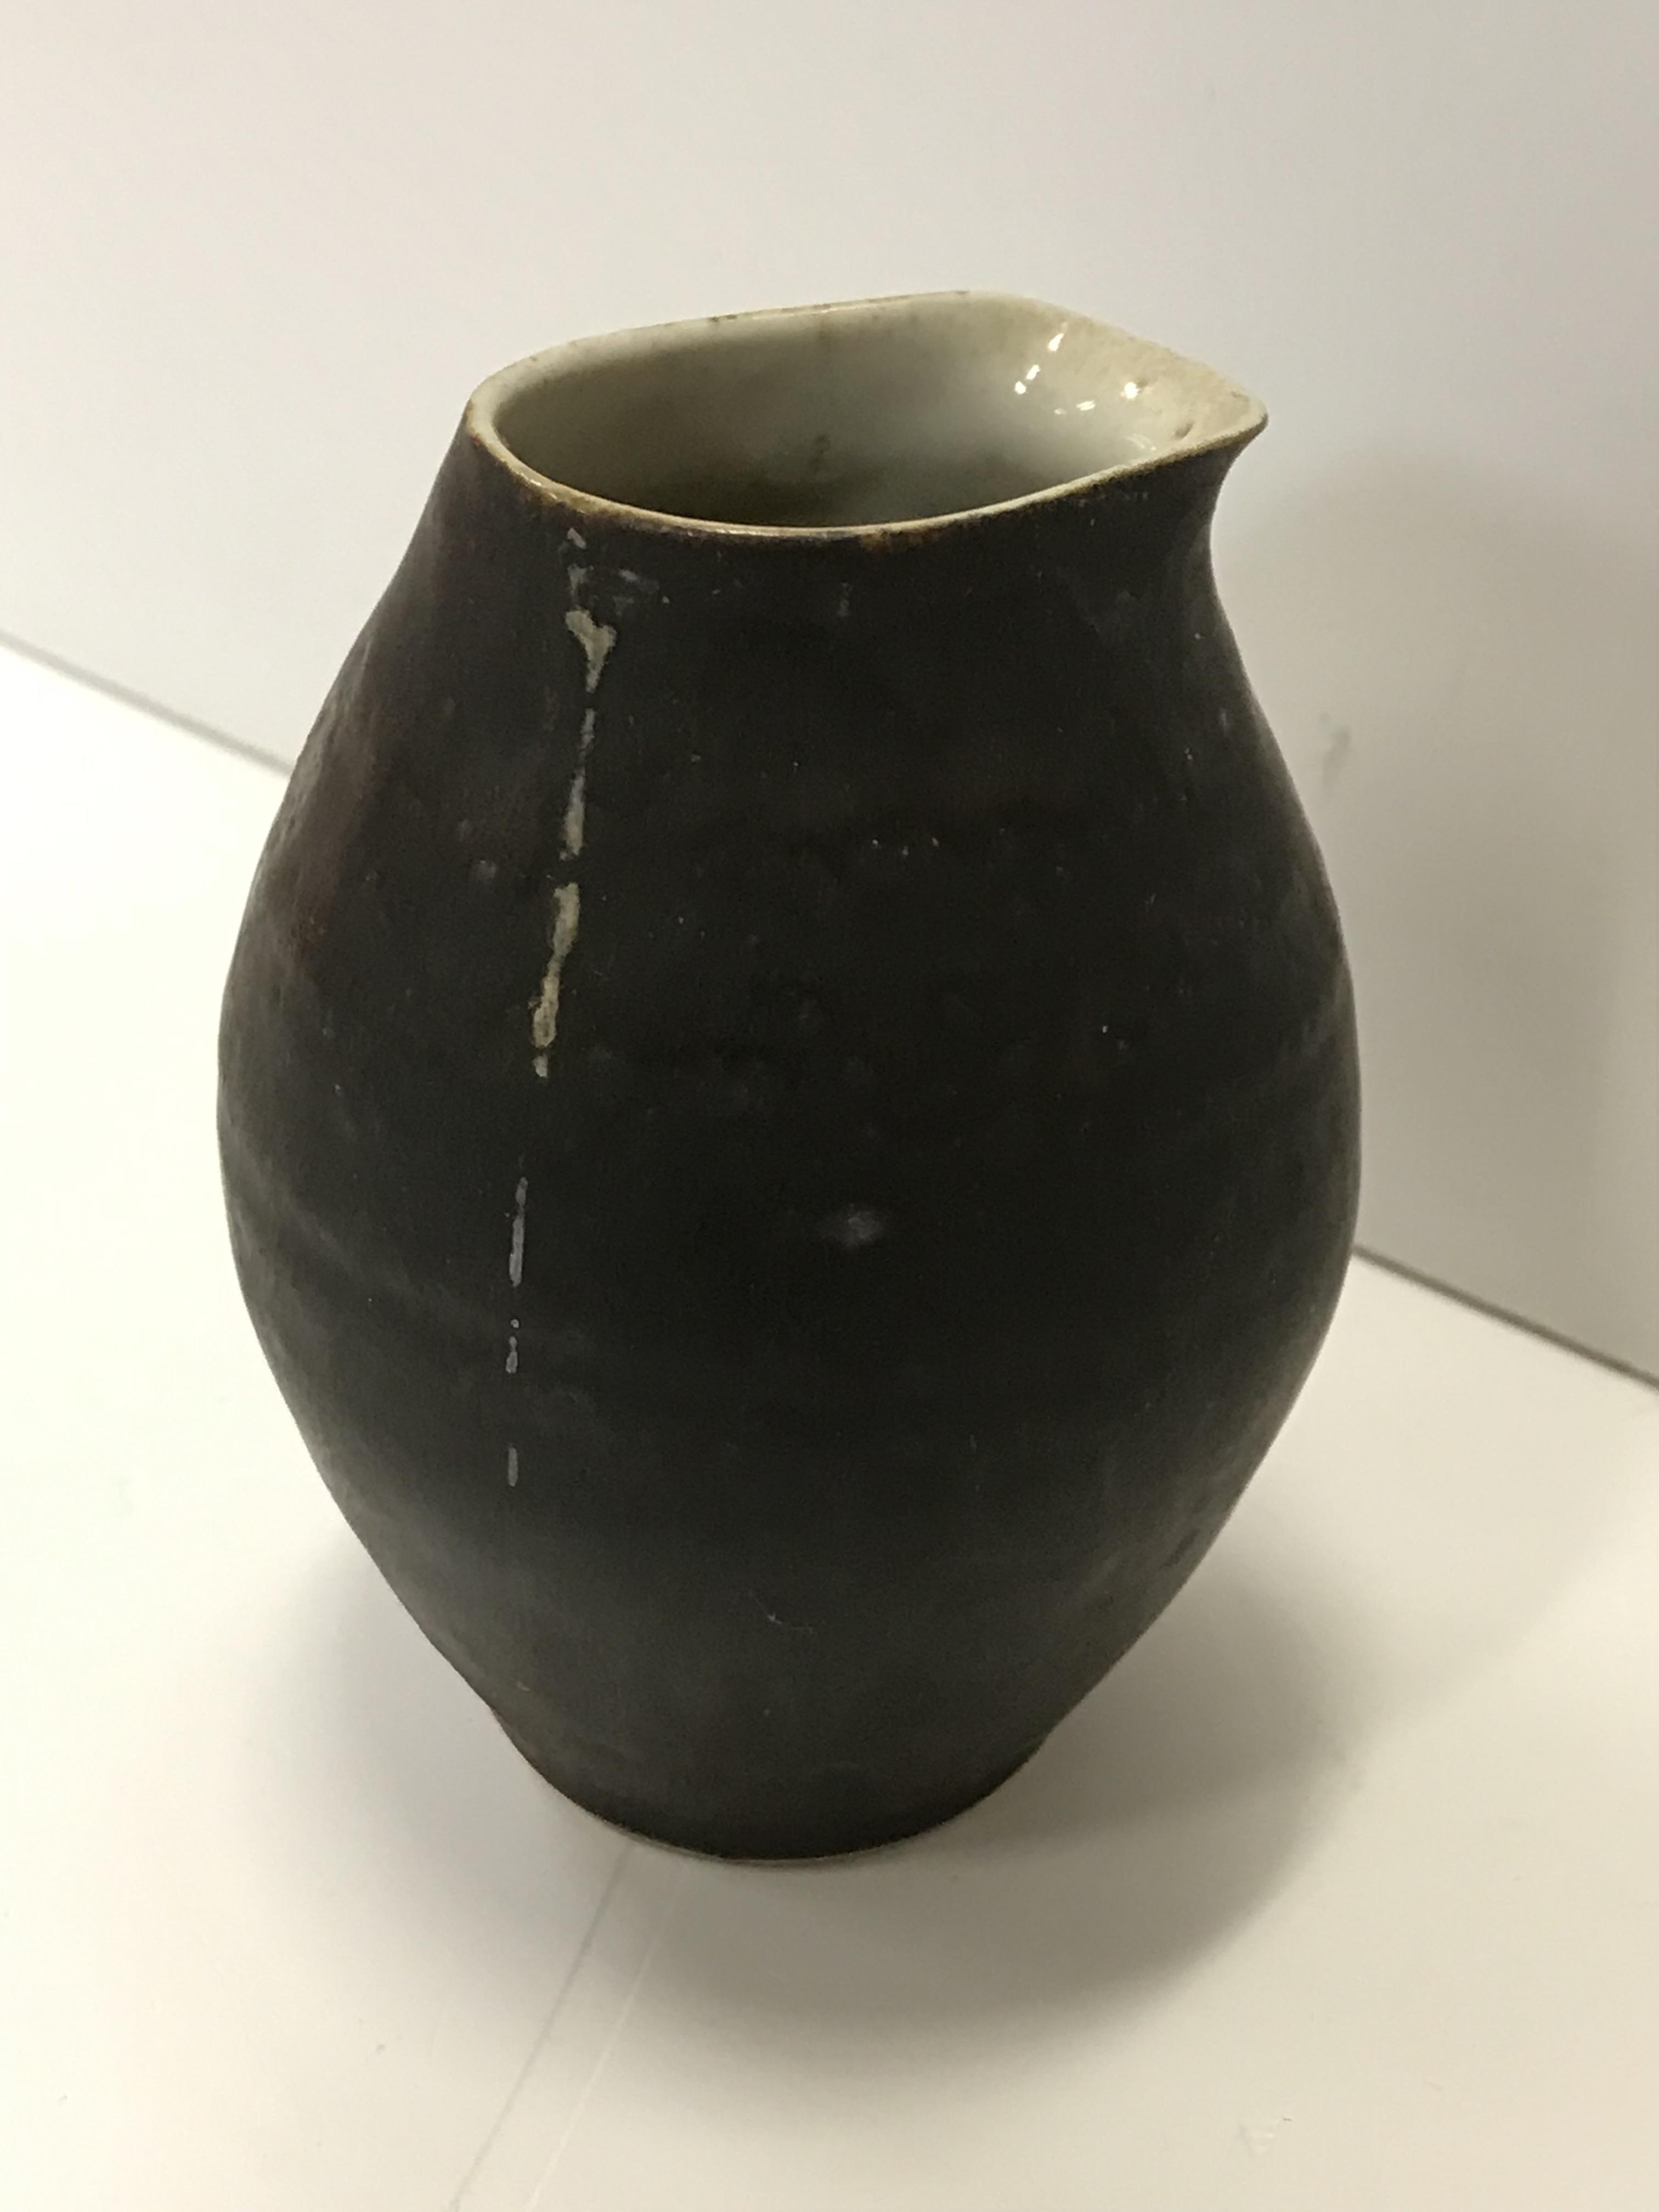 A Lucie Rie pouring vessel, with black glazed exterior and simple design, - Image 2 of 12